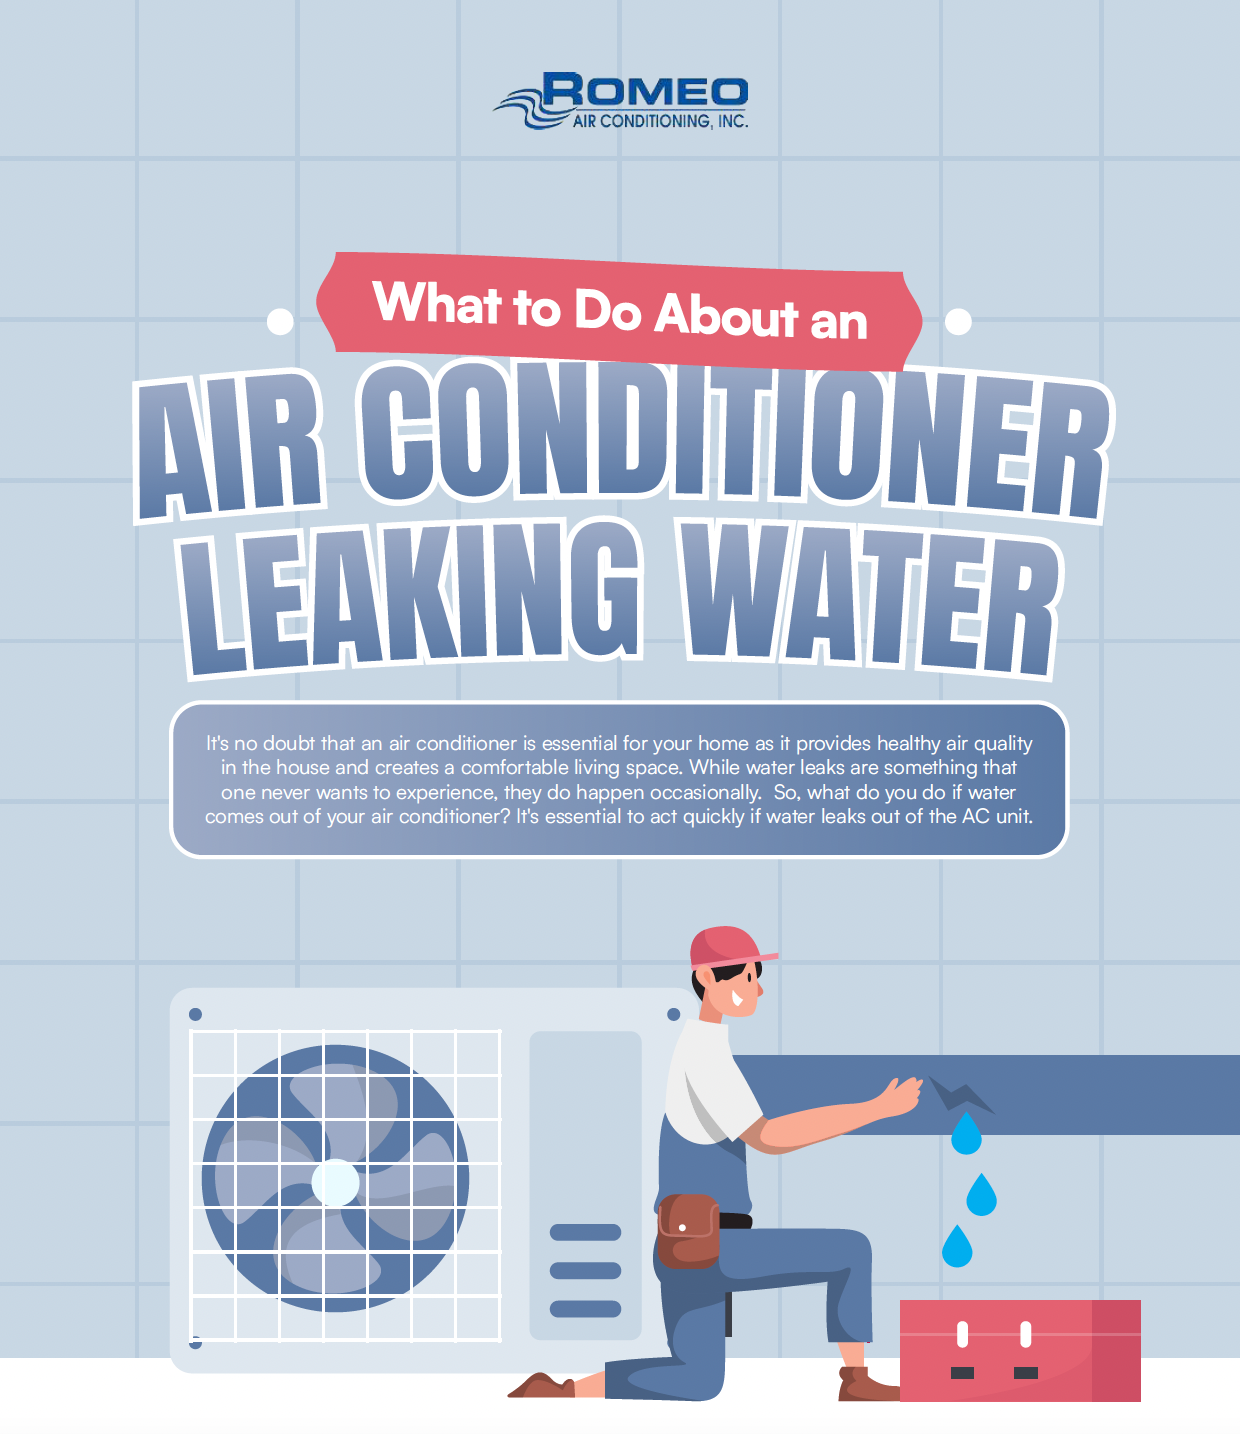 What to do about an air conditioner leaking water